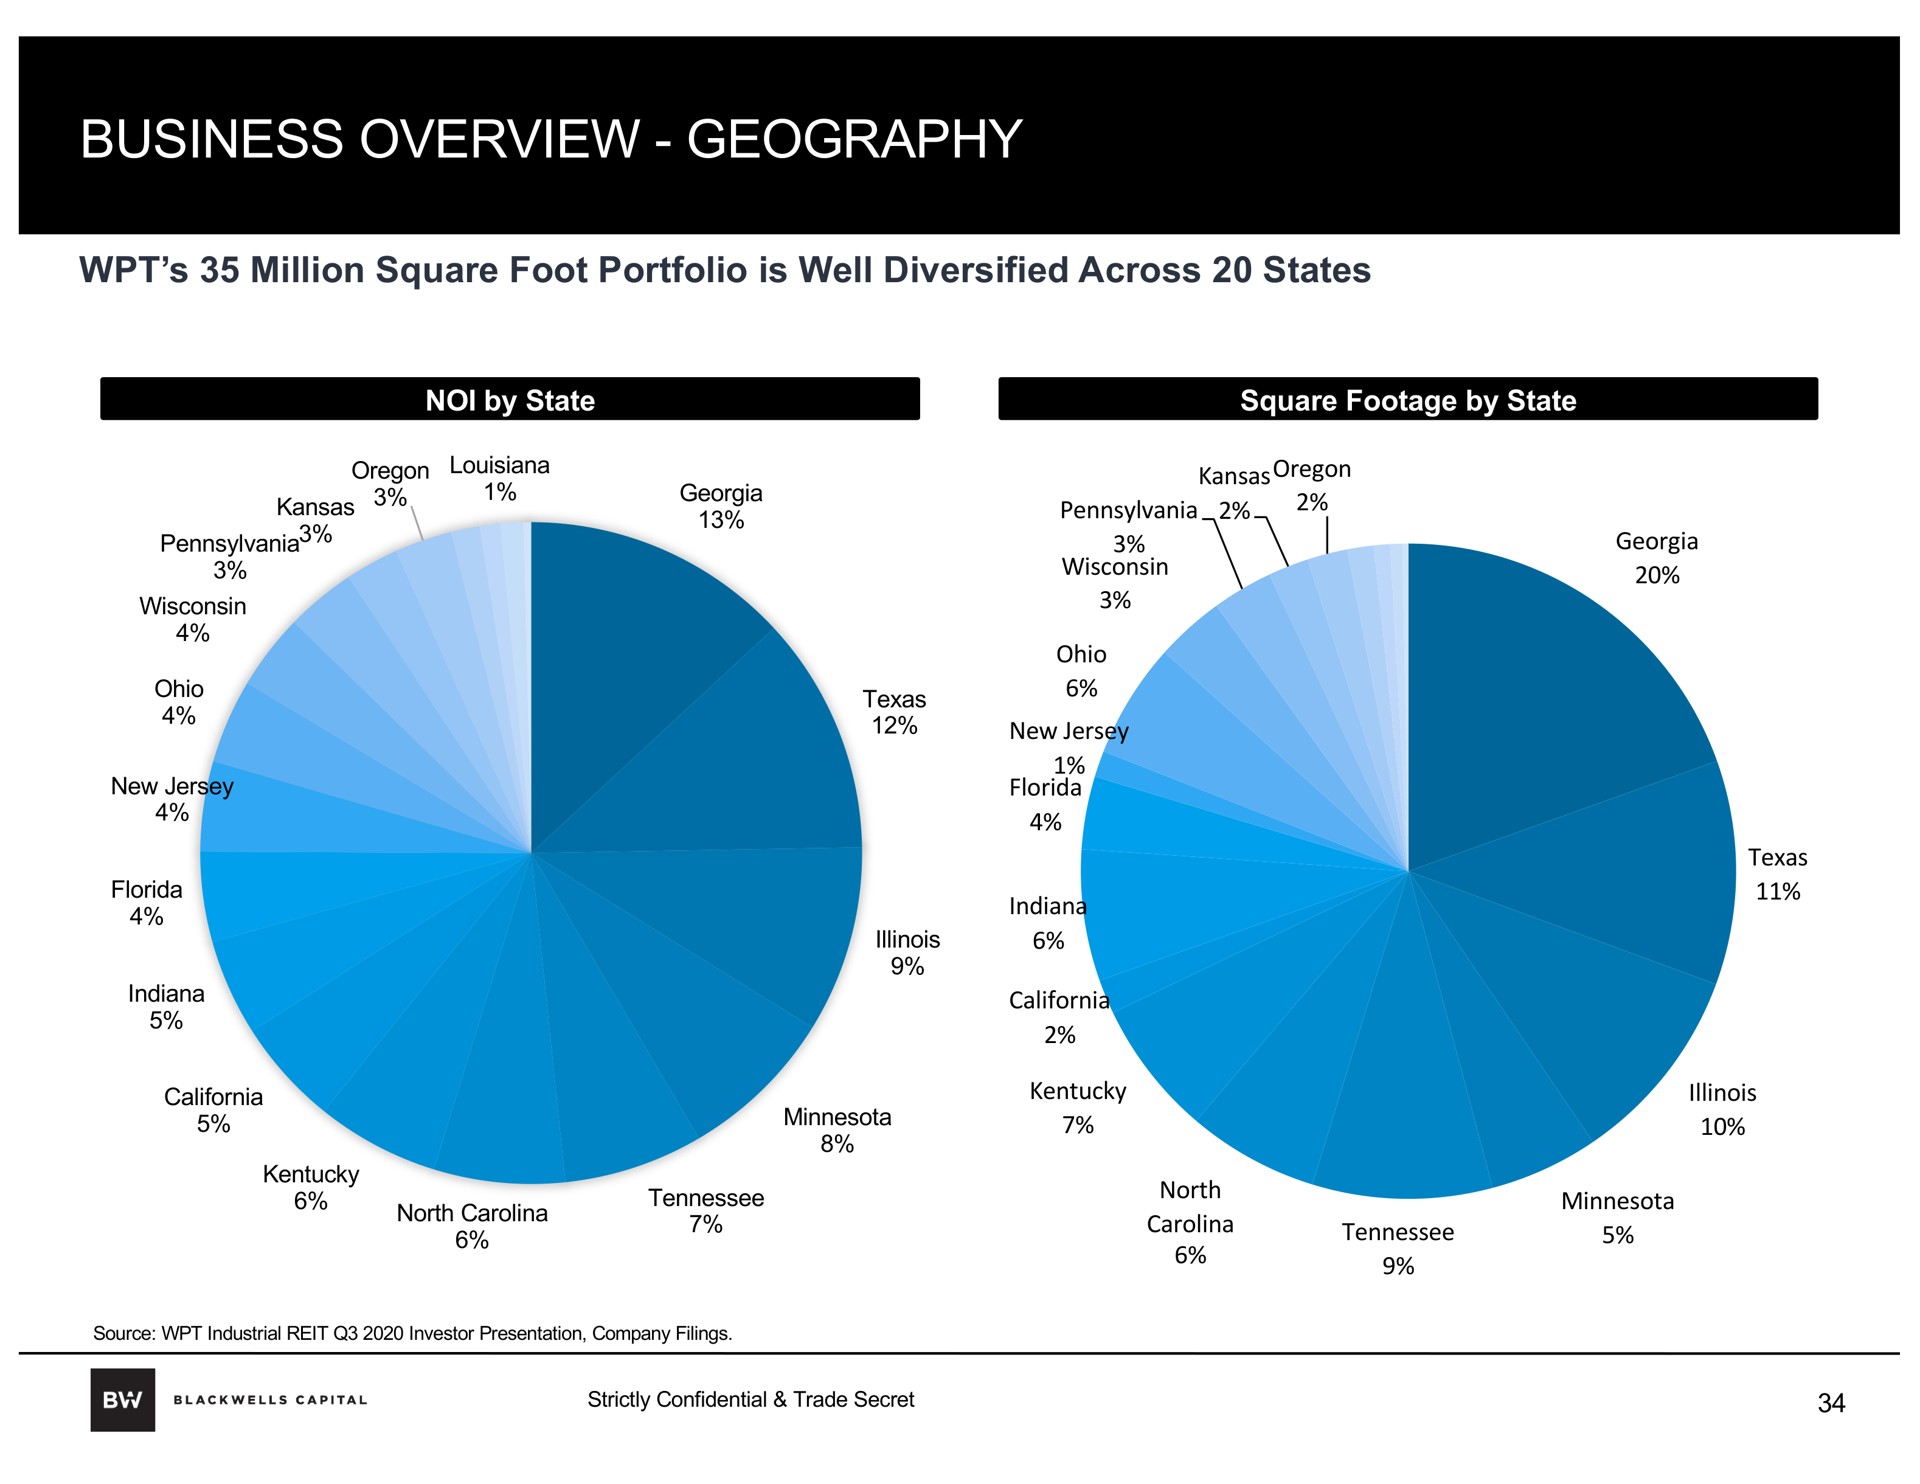 business overview geography | Blackwells Capital